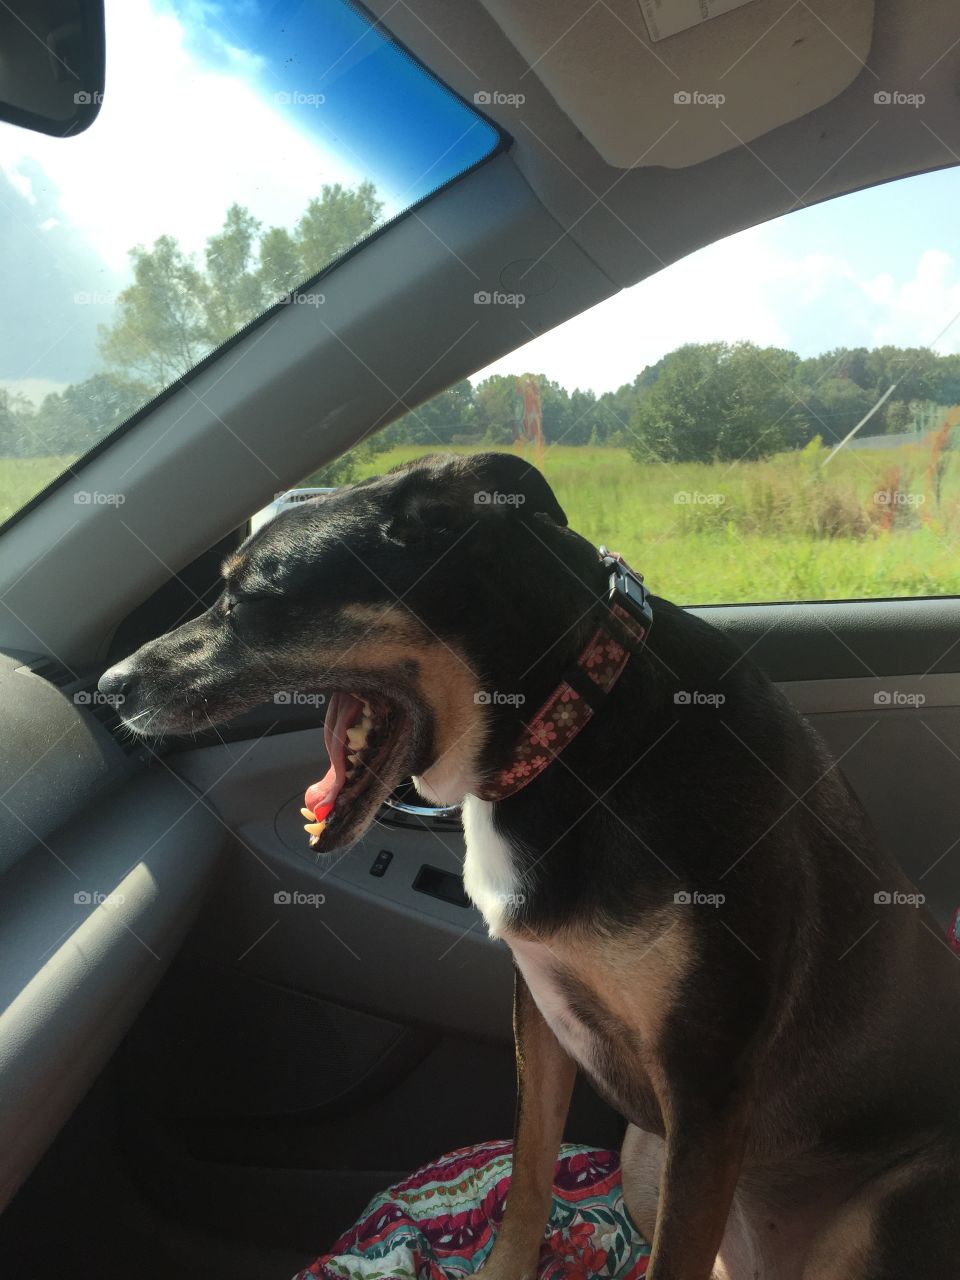 She loves going for a ride but it sure does make her sleepy!